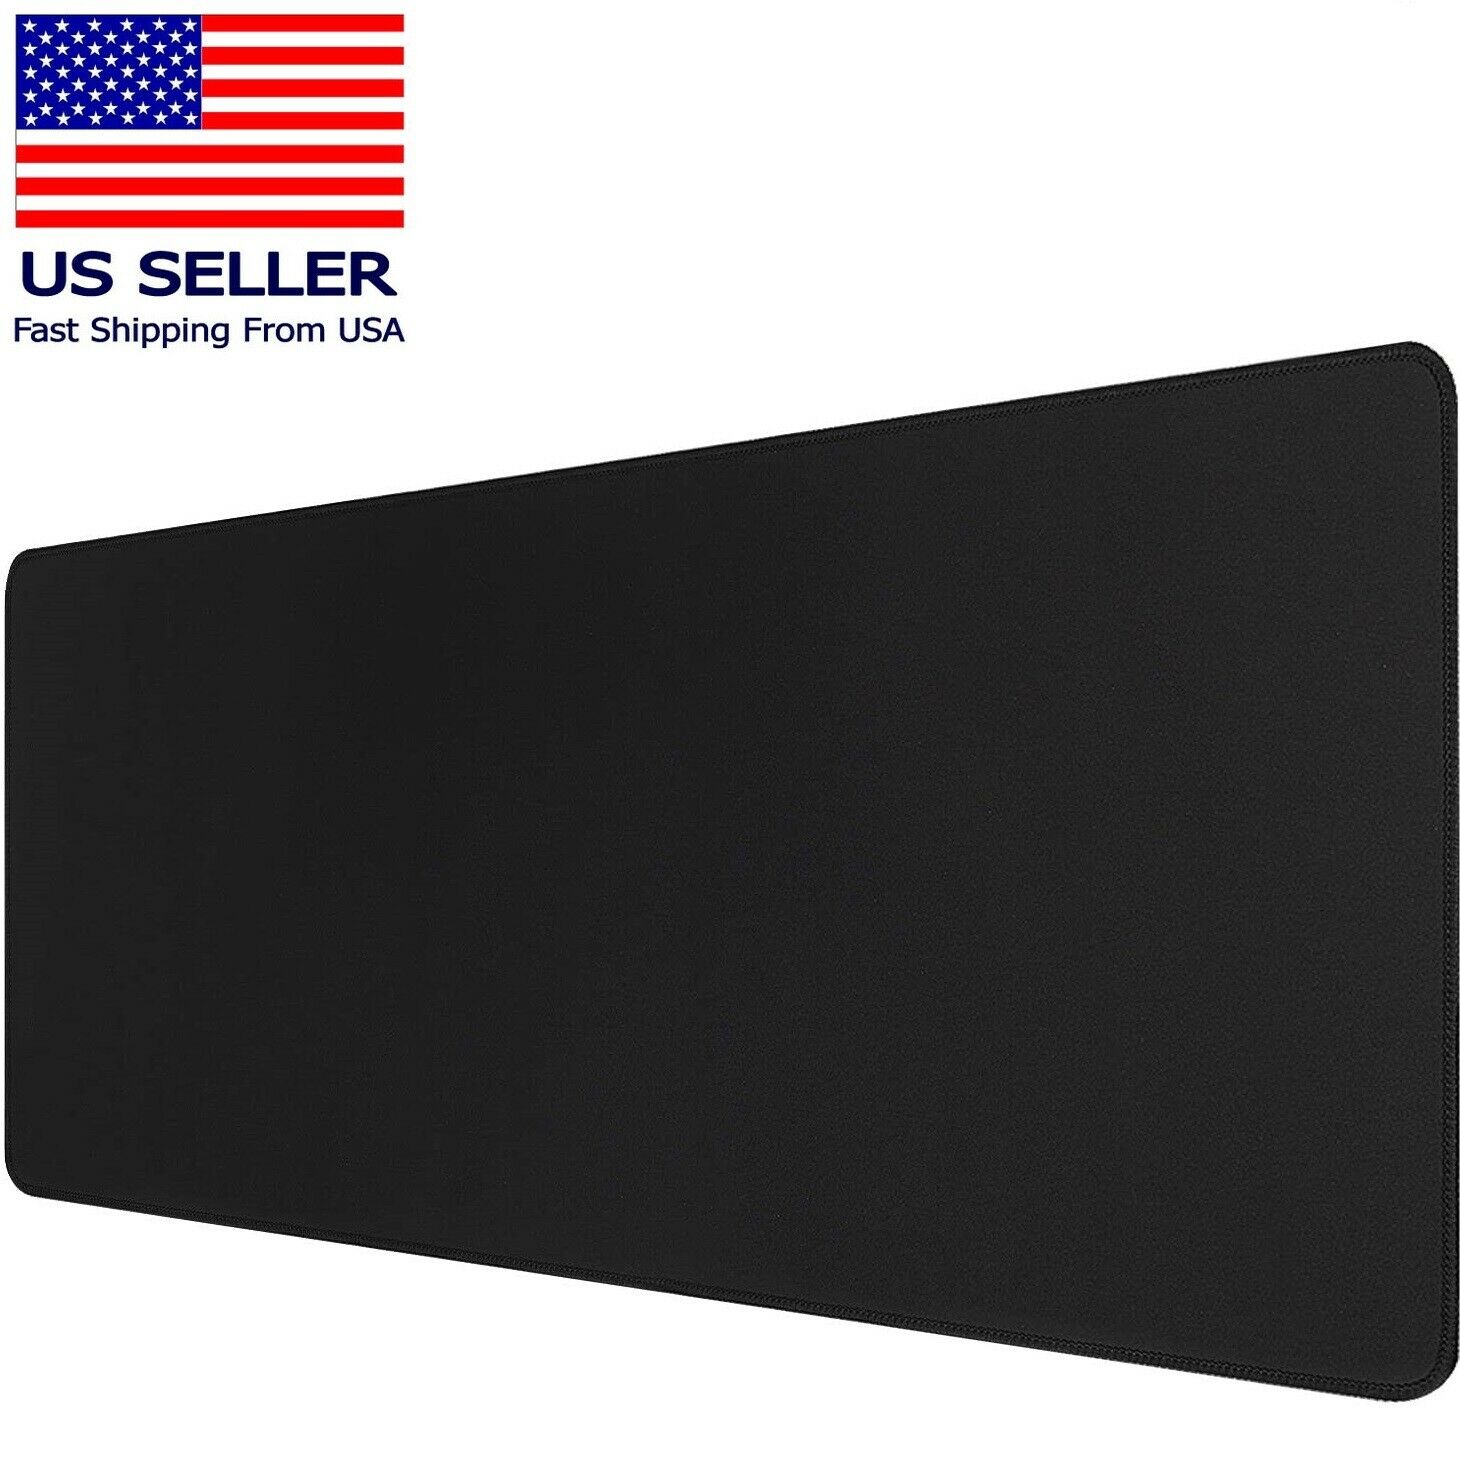 Large Extended Gaming Mouse Pad Stitched Edges Non-slip Waterproof 31.5x11.8 In